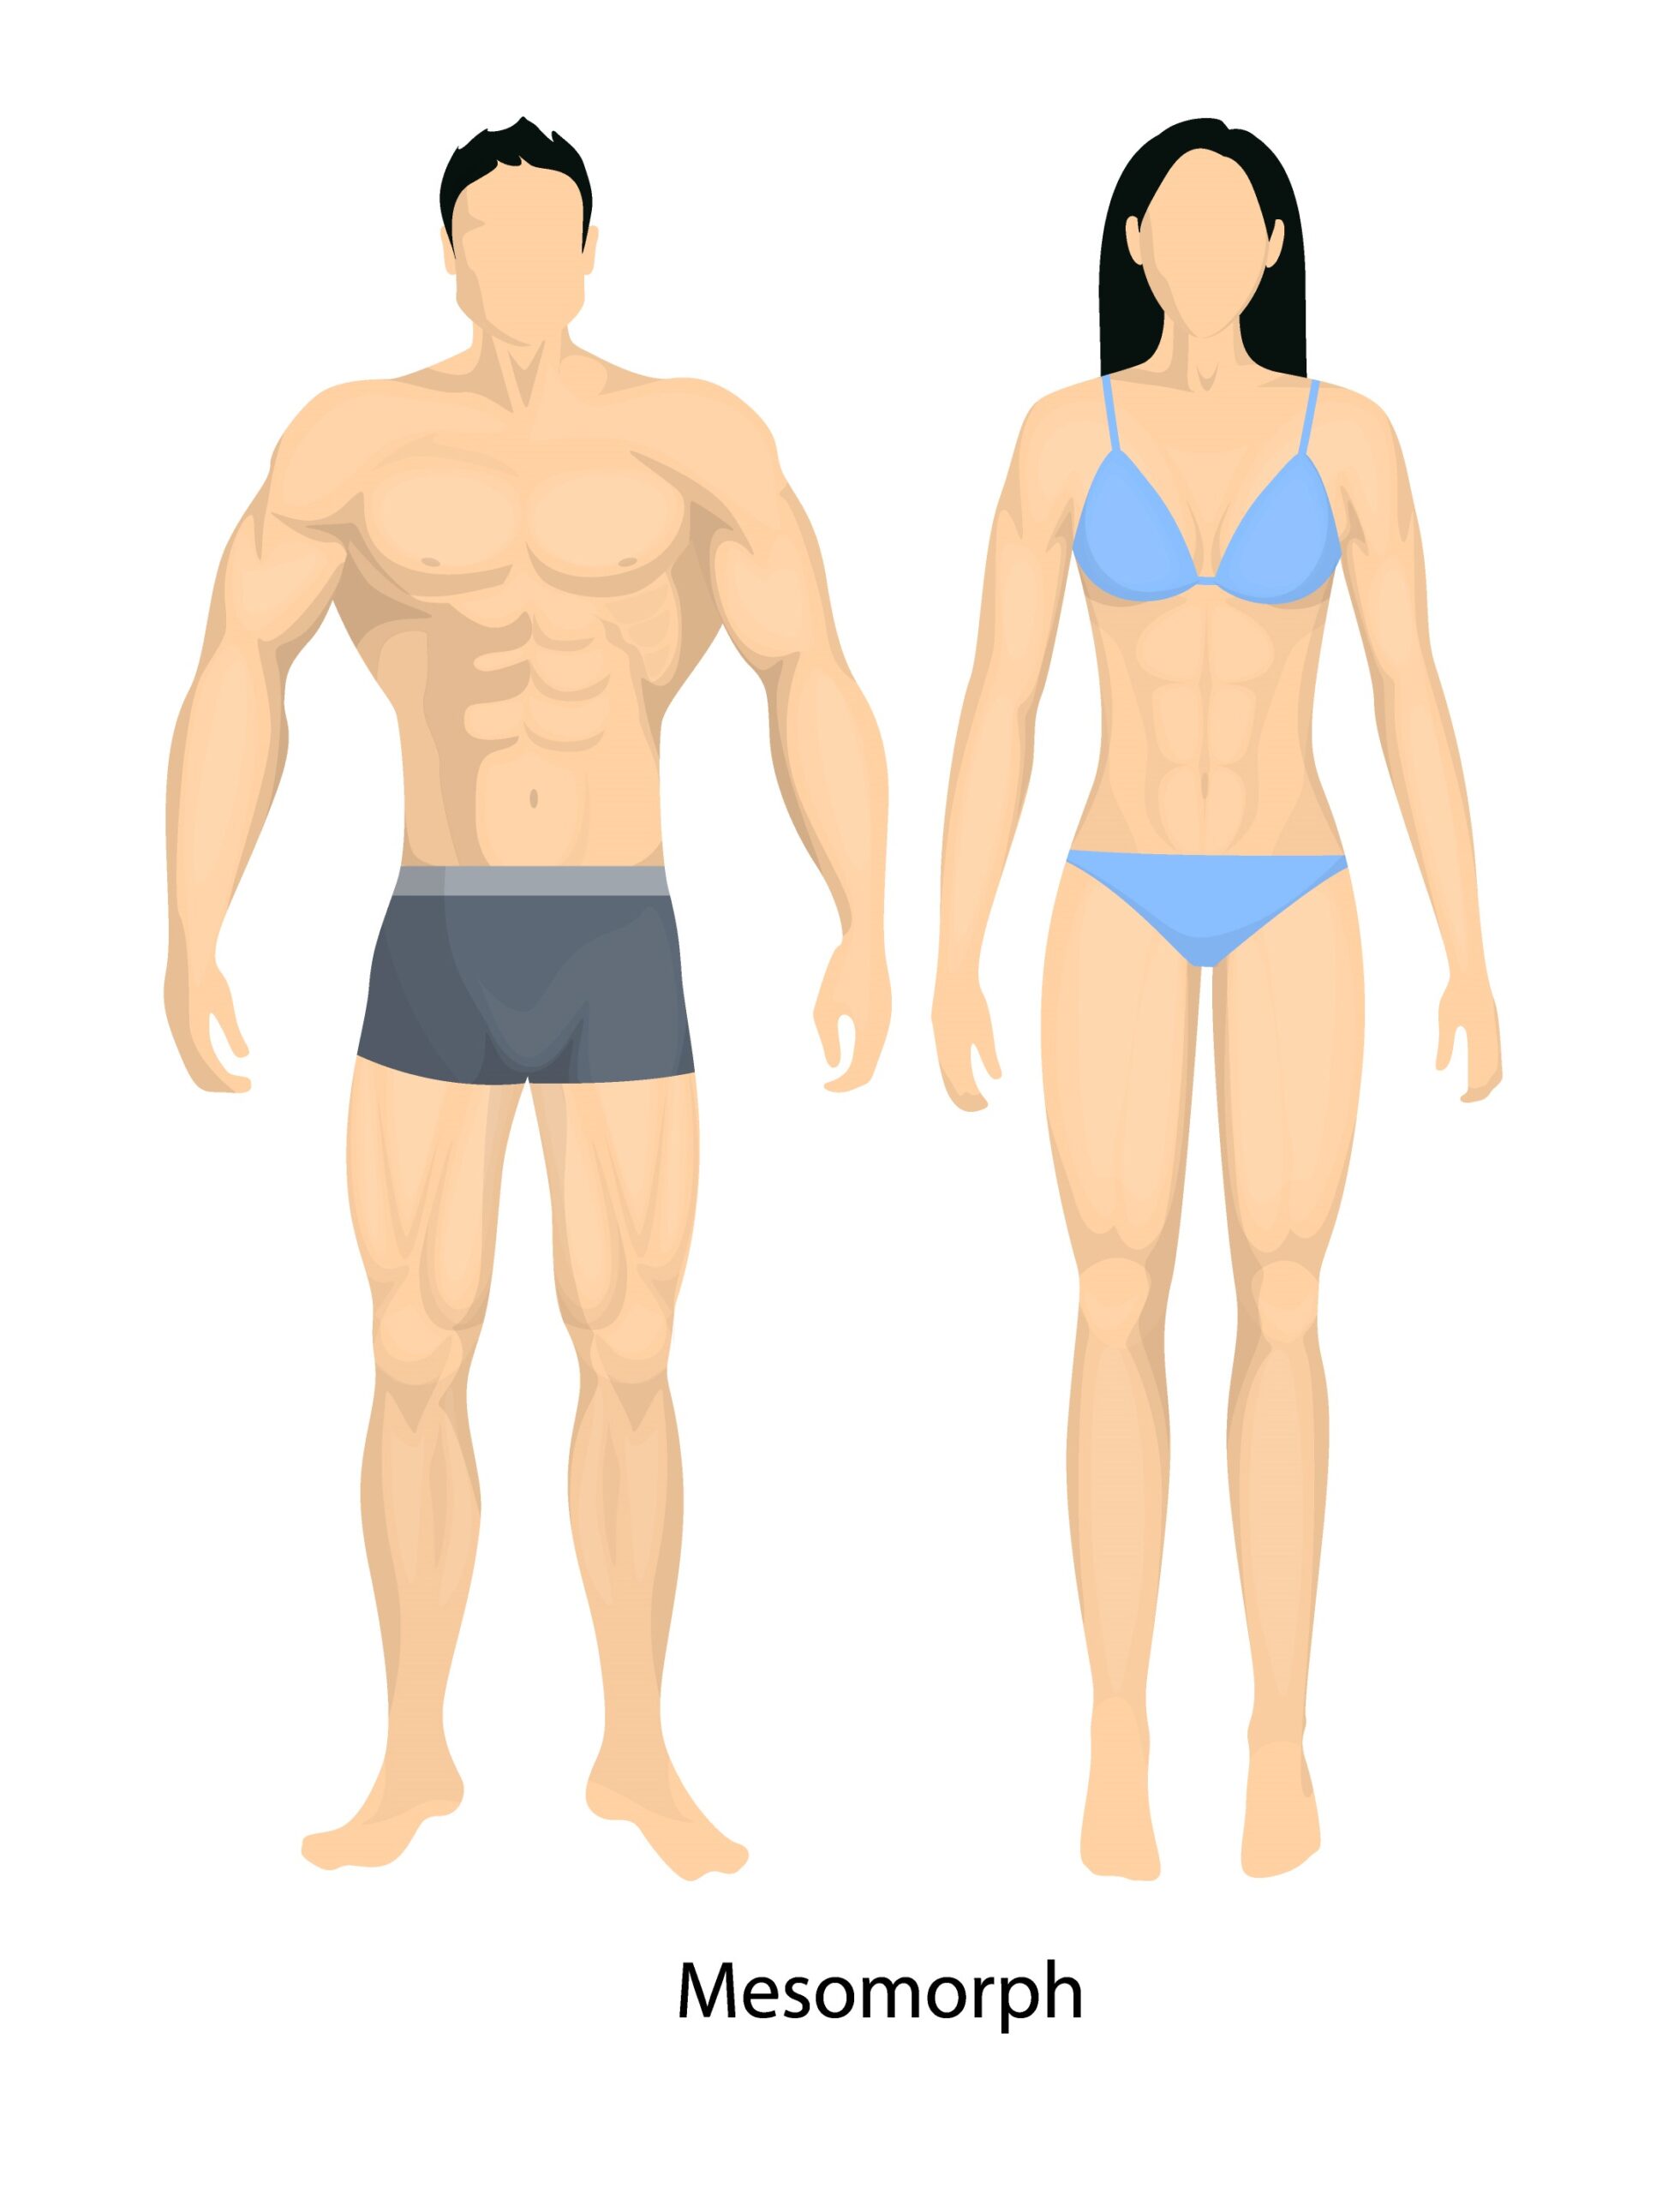 Mesomorph (somatotype Muscular and well proportioned, easy to gain weight)